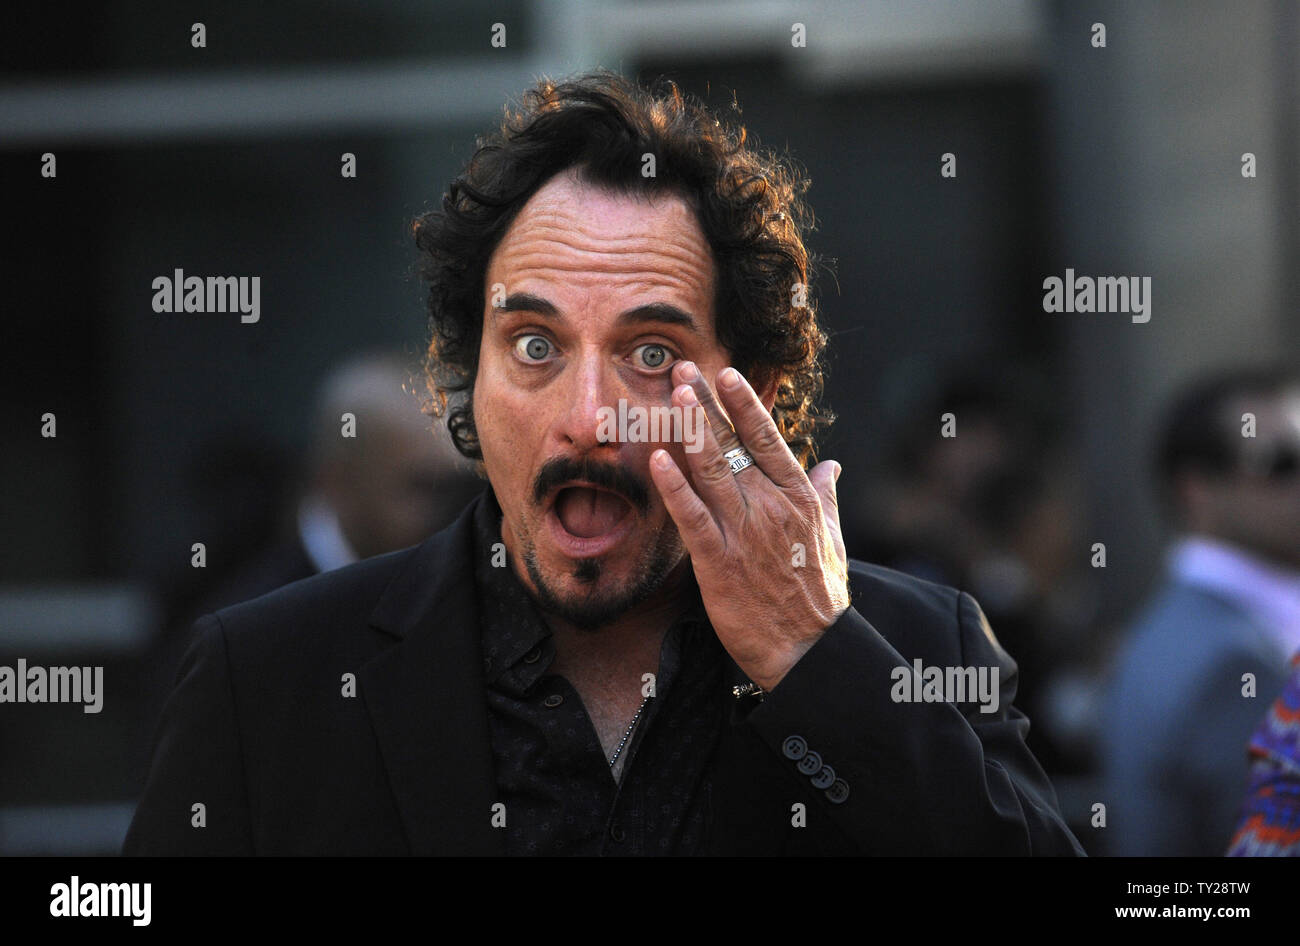 Cast member Kim Coates attends the Sons of Anarchy, Season 4 premiere screening at the Arclight Theatre in the Hollywood section of Los Angeles on August 30, 2011.      UPI/Phil McCarten Stock Photo